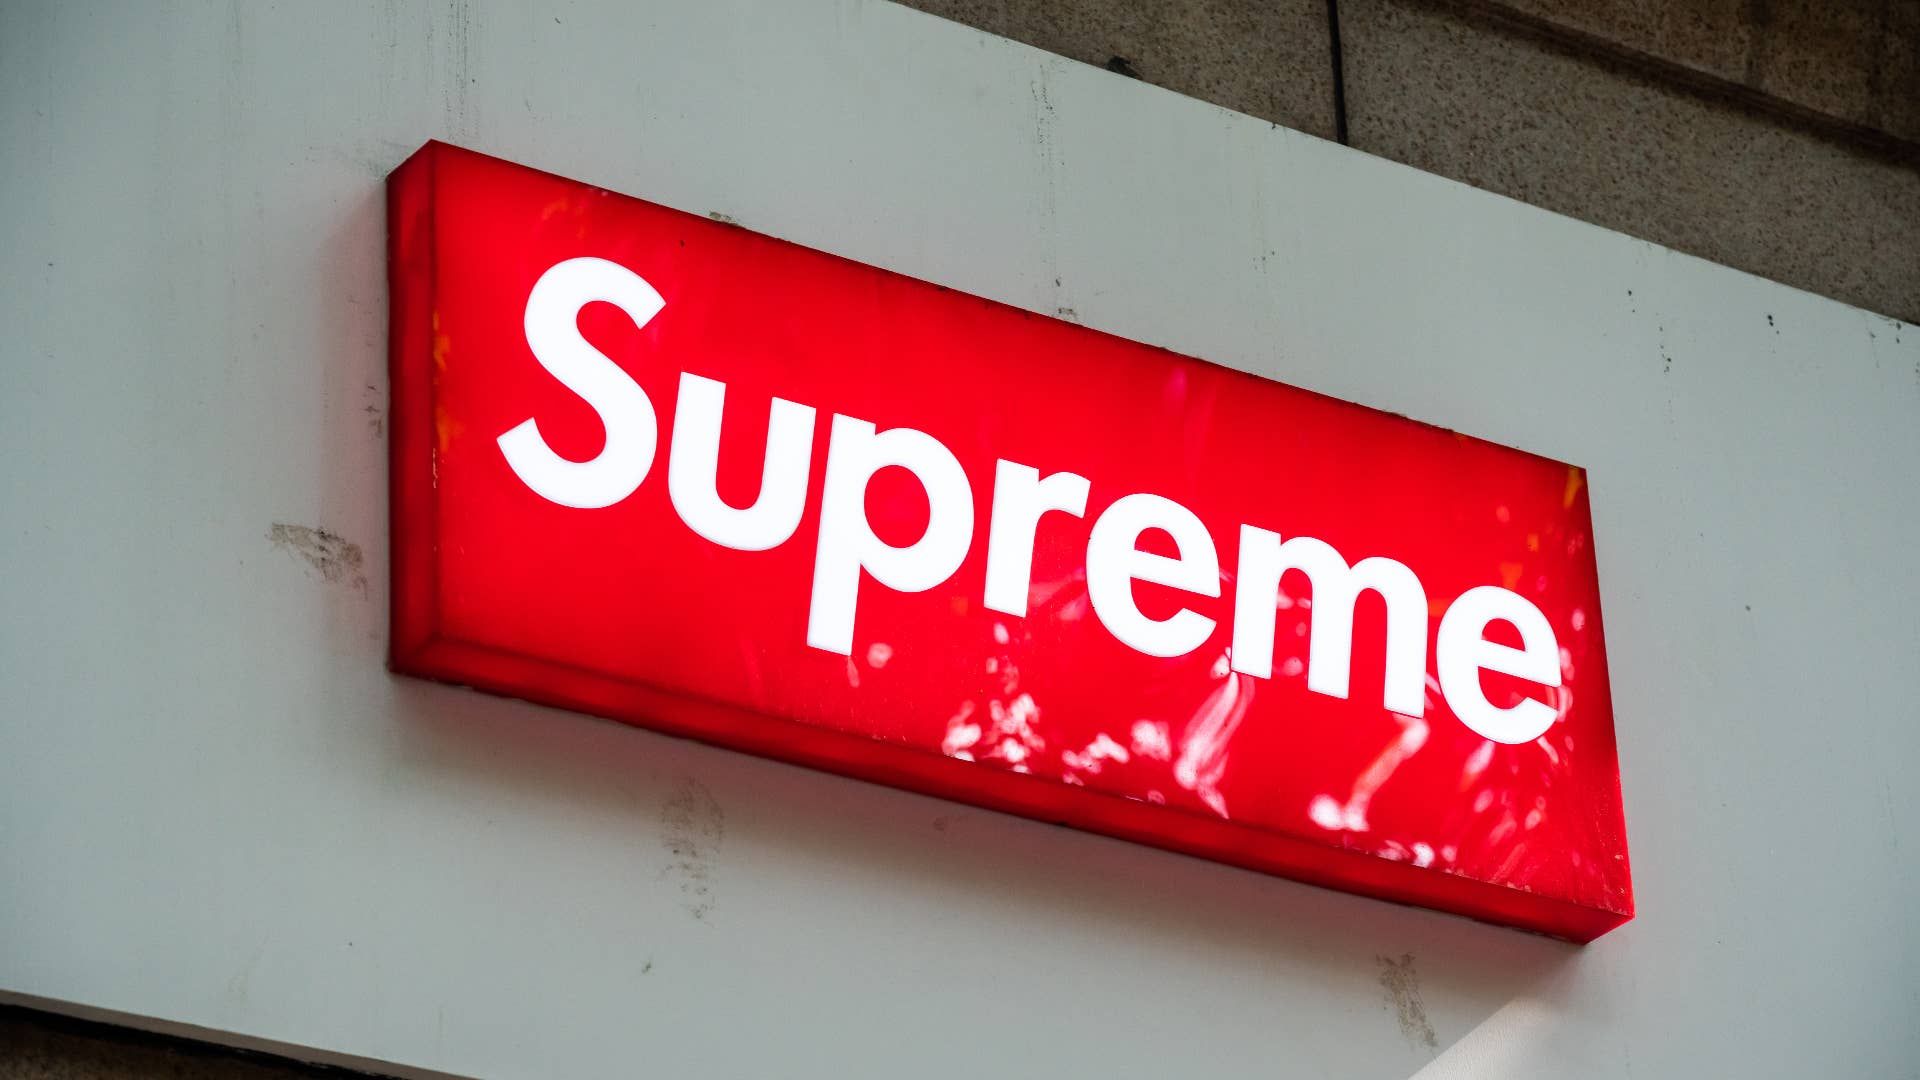 A logo for the brand Supreme is shown